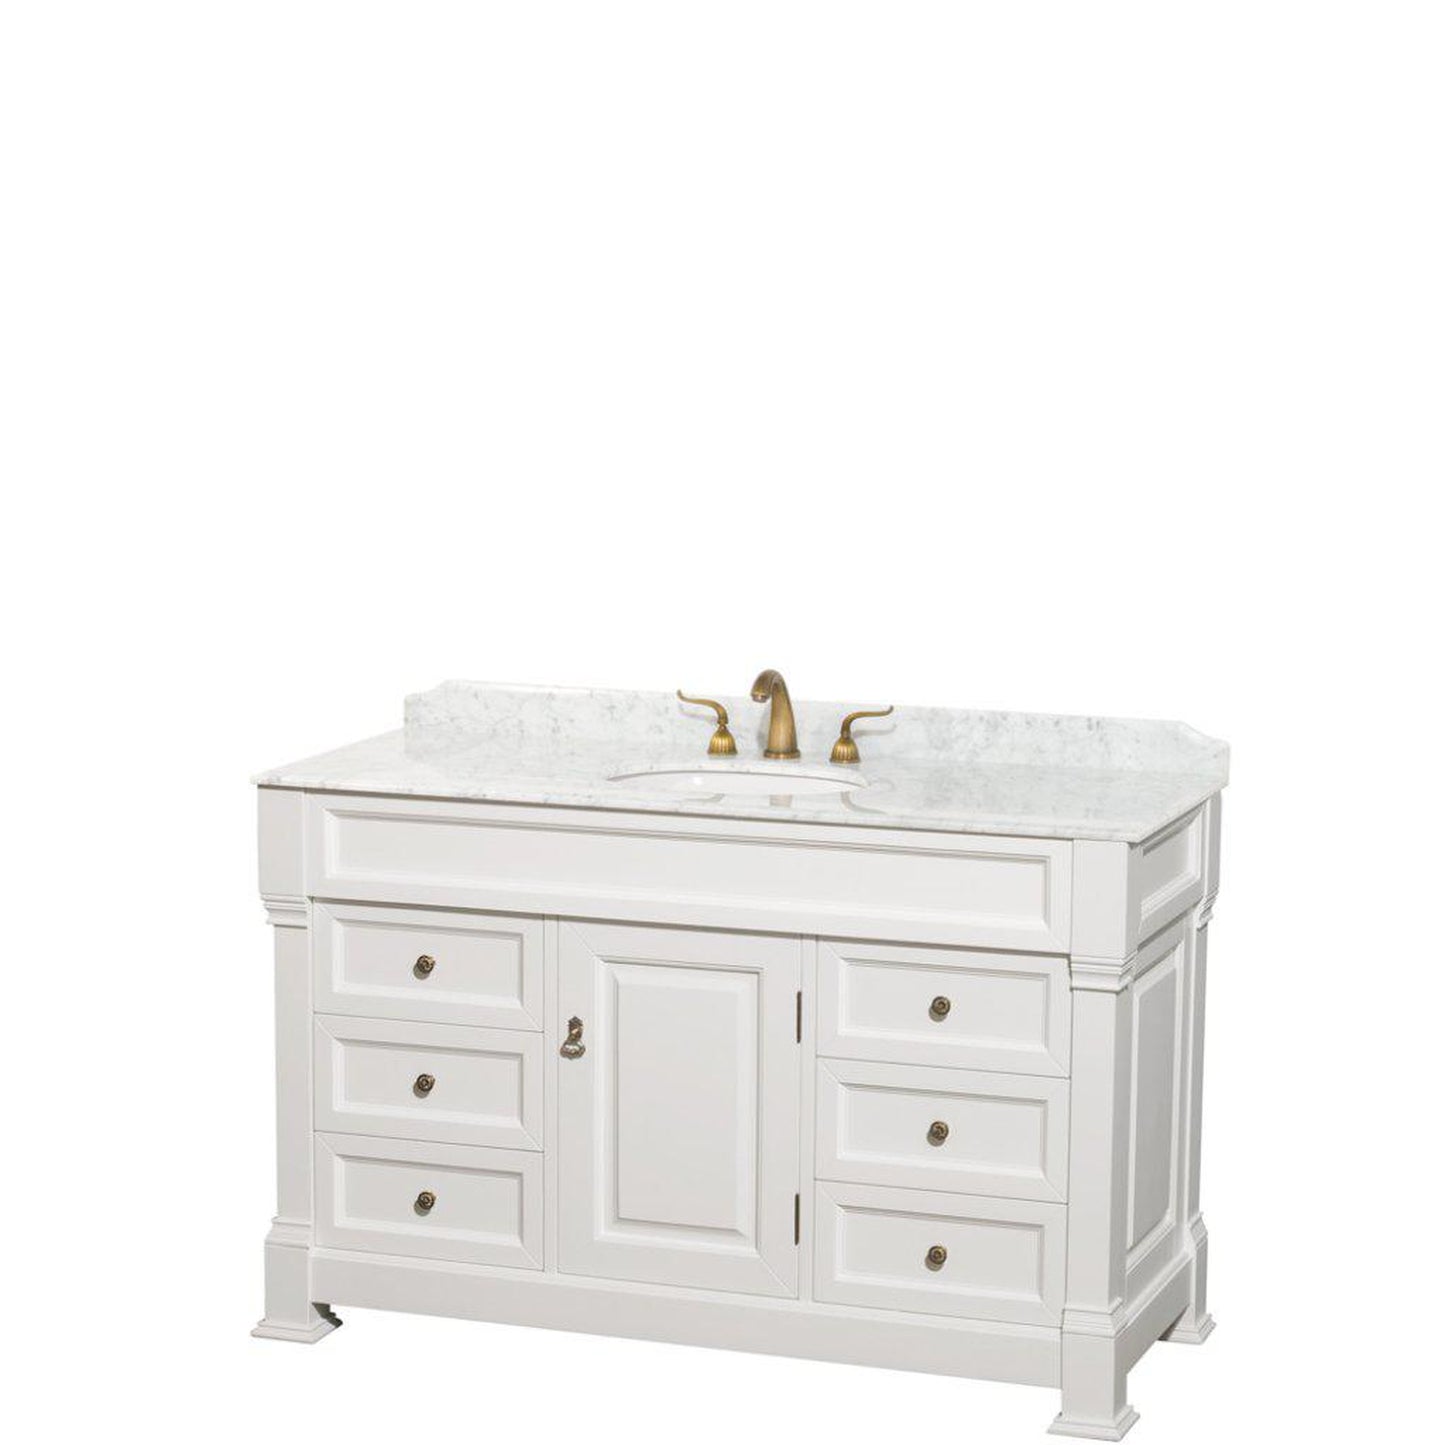 Wyndham Collection Andover 55" Single Bathroom White Vanity With White Carrara Marble Countertop And Undermount Oval Sink, And No Mirror